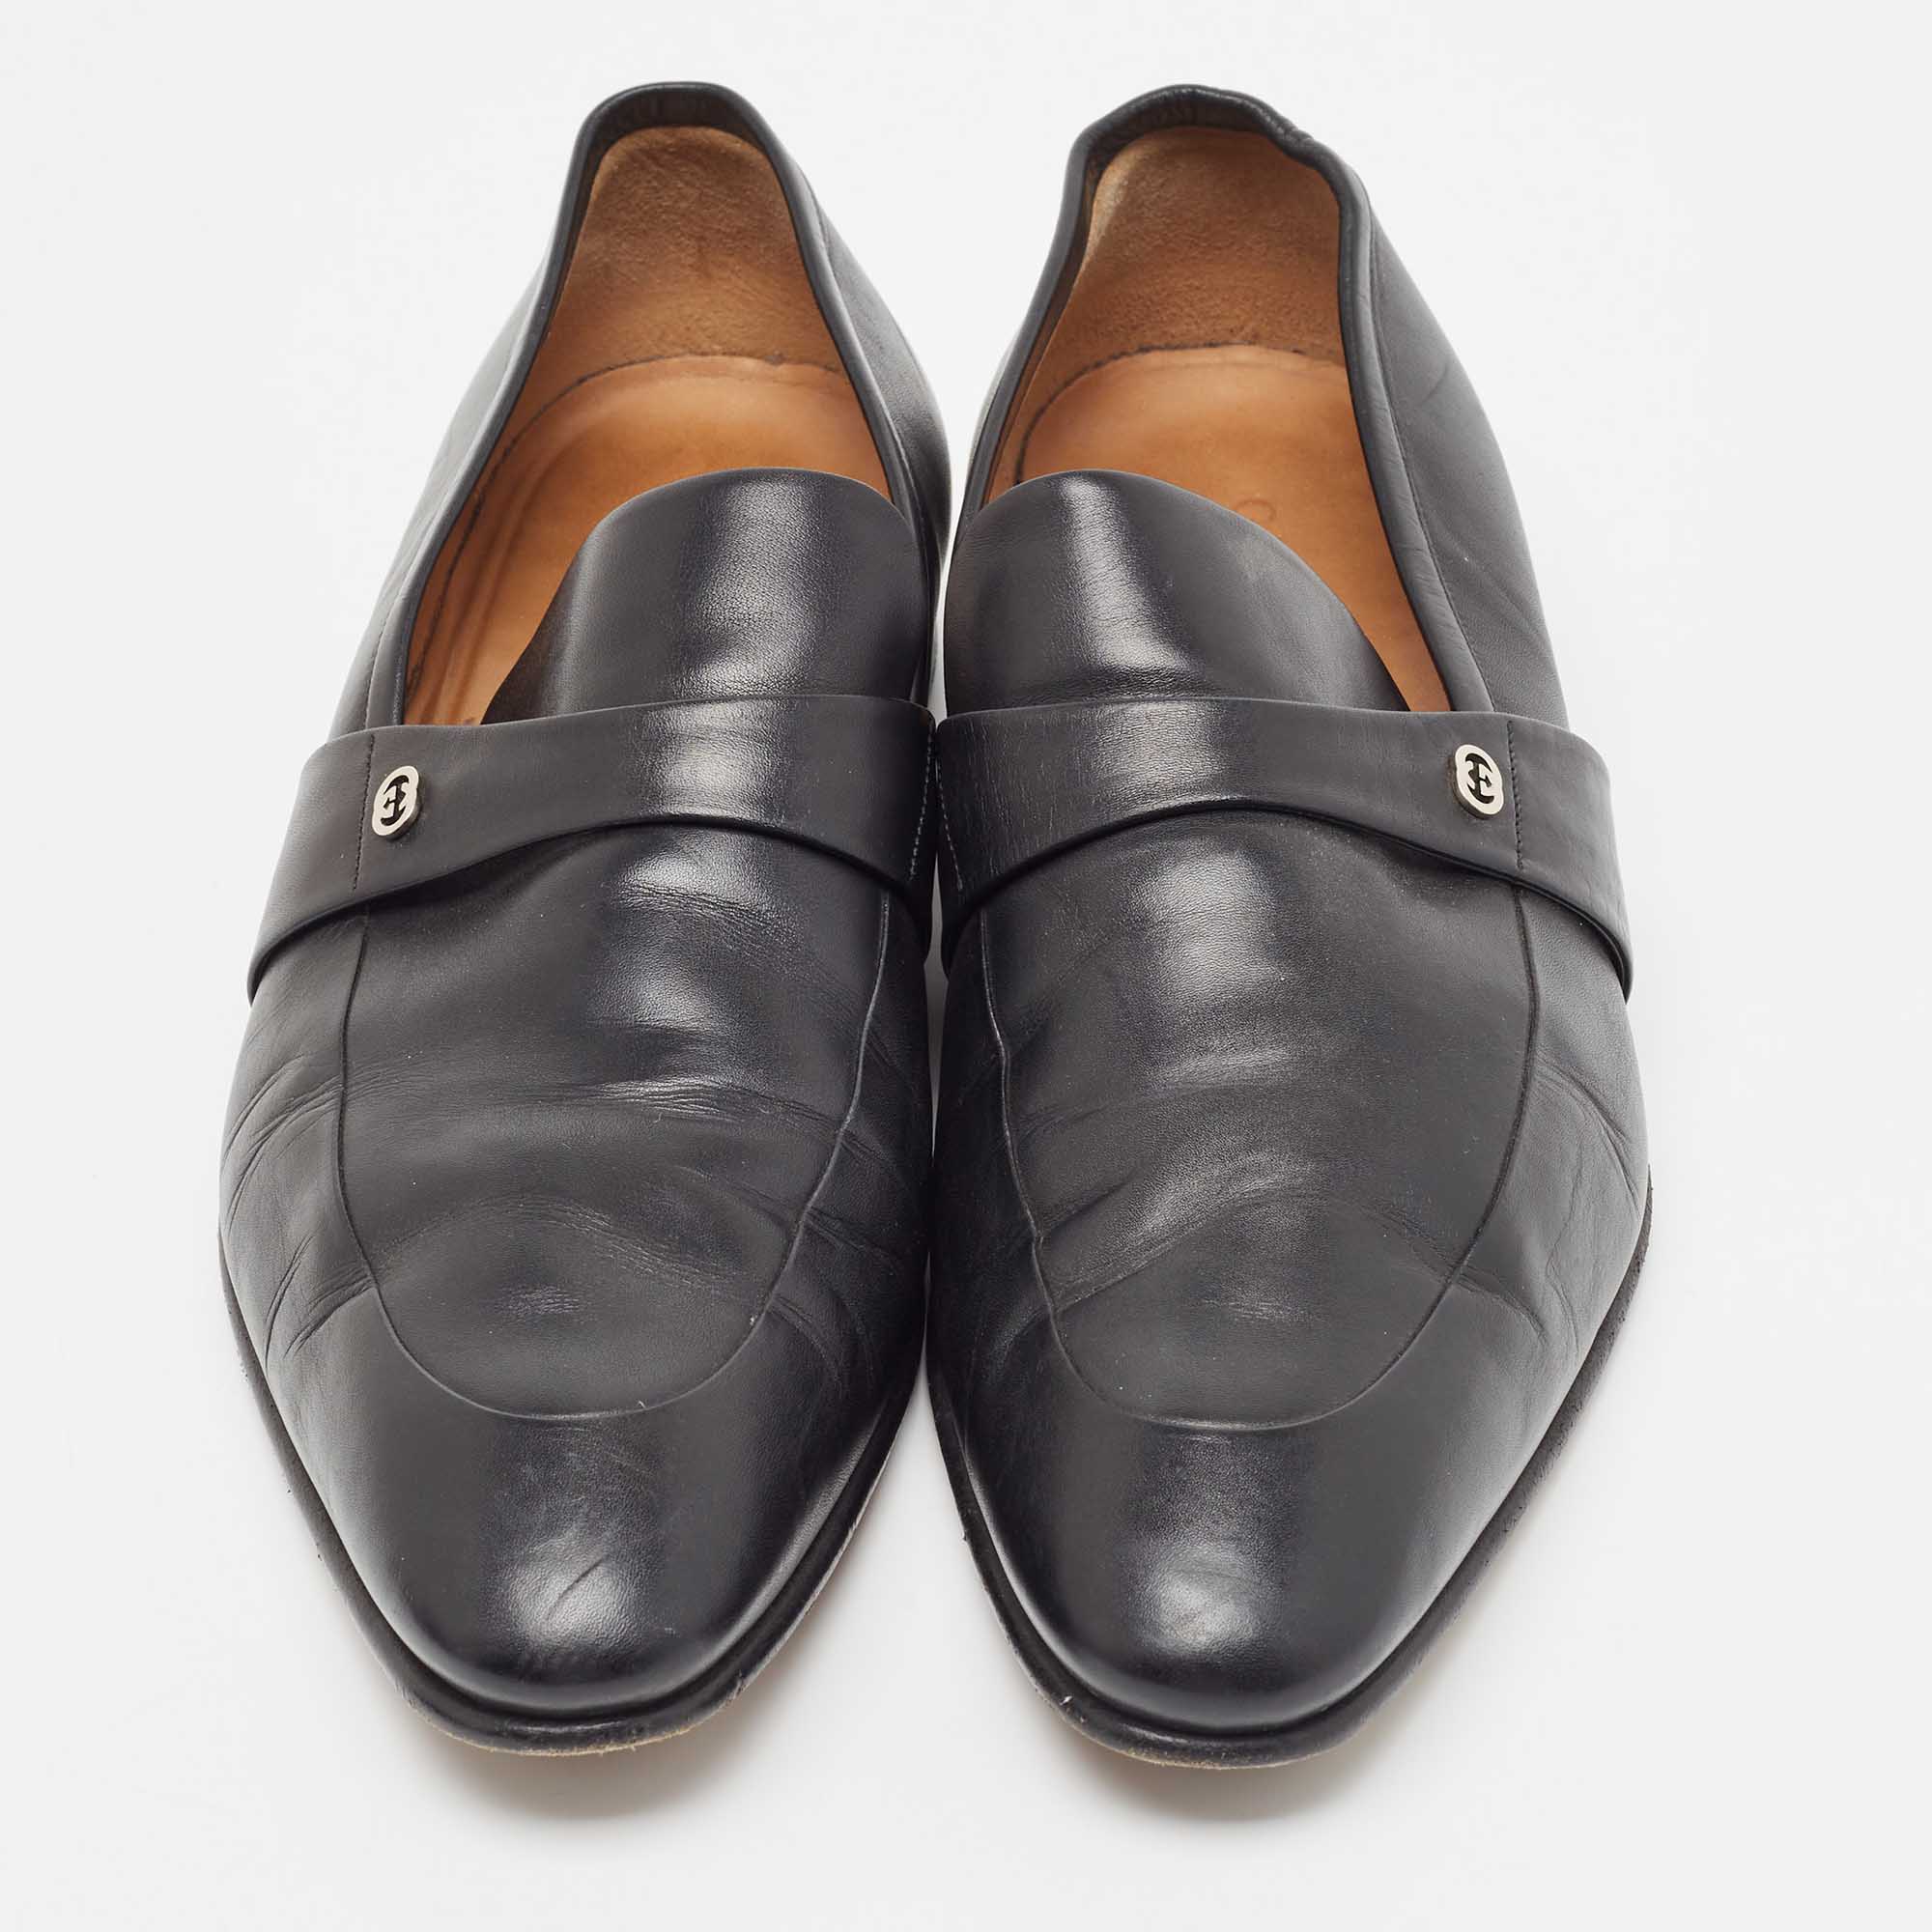 Gucci Black Leather Slip On Loafers Size 44